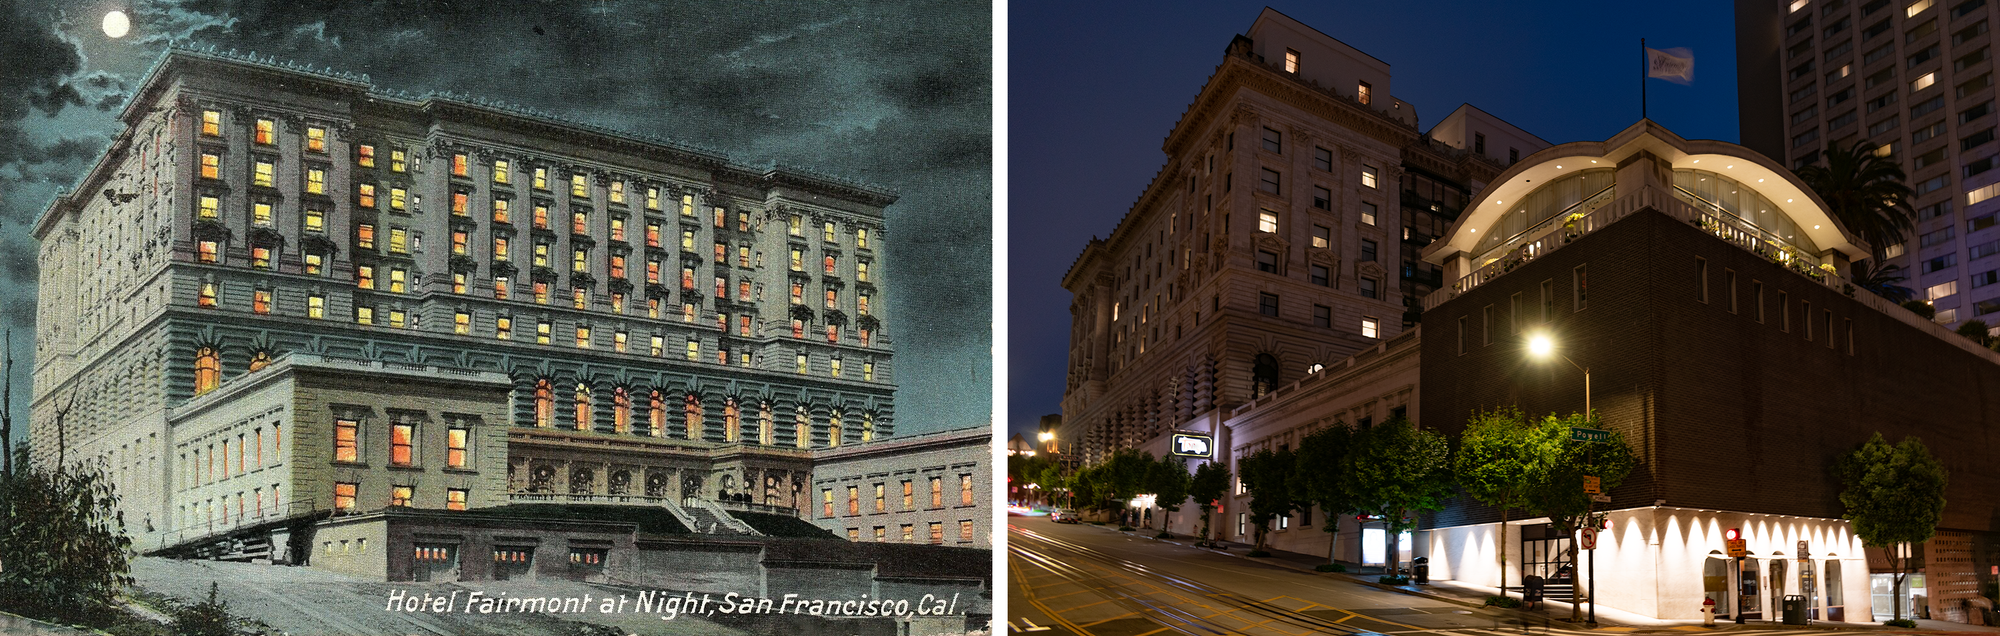 Postcard on the left: Fairmont at night, room lights illuminated, bright moon, roughly six stories with sub-levels tumbling down to the street. Photo on the right: brownish modernist block on the corner and a tower on the right, small green trees.